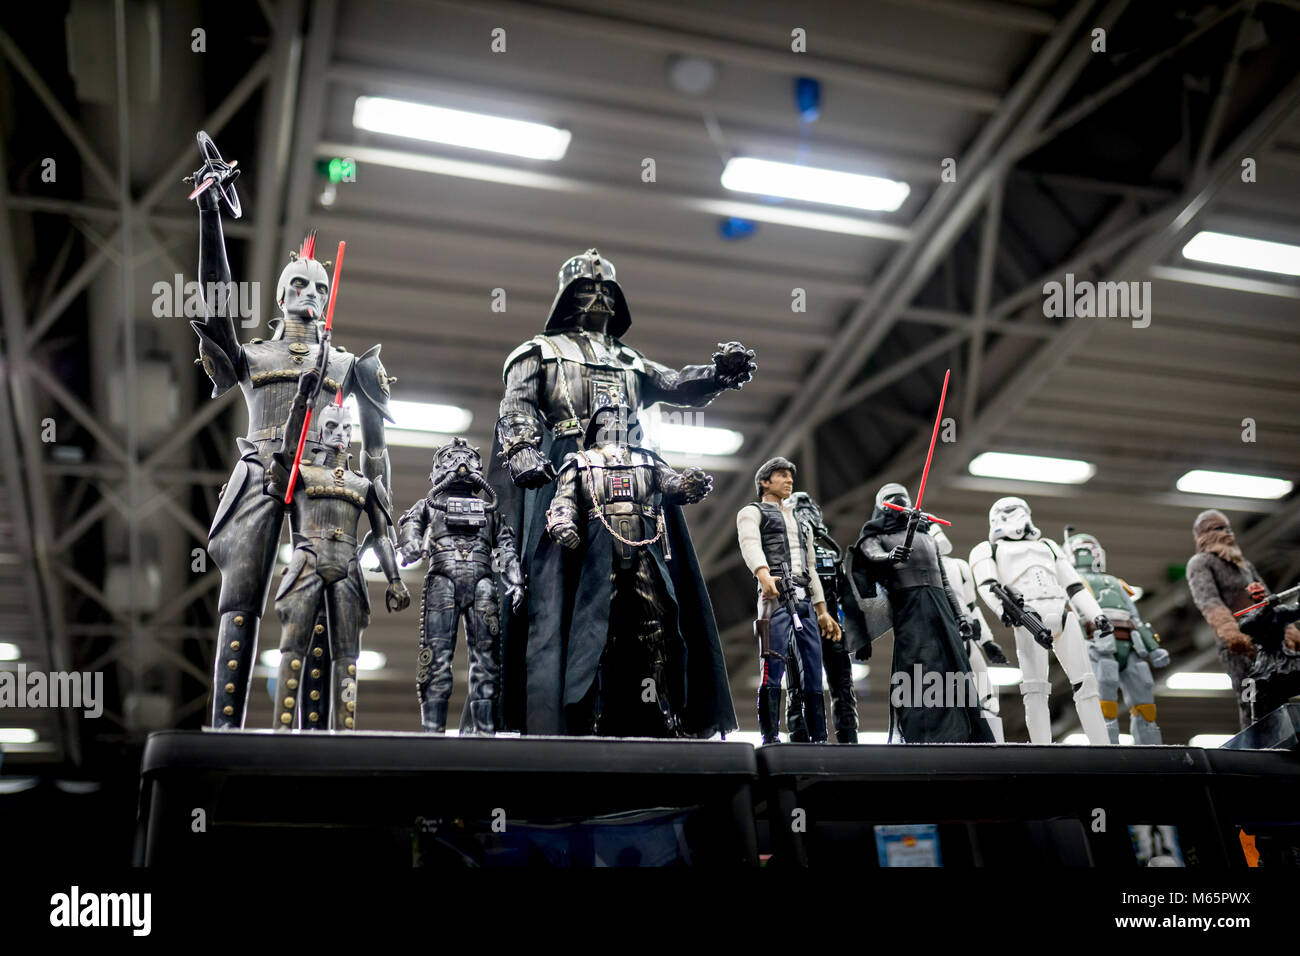 Doncaster Comic Con 11th Feruary 2018 at The Doncaster Dome. Star Wars action figures or toys on display at a comic con convention Stock Photo